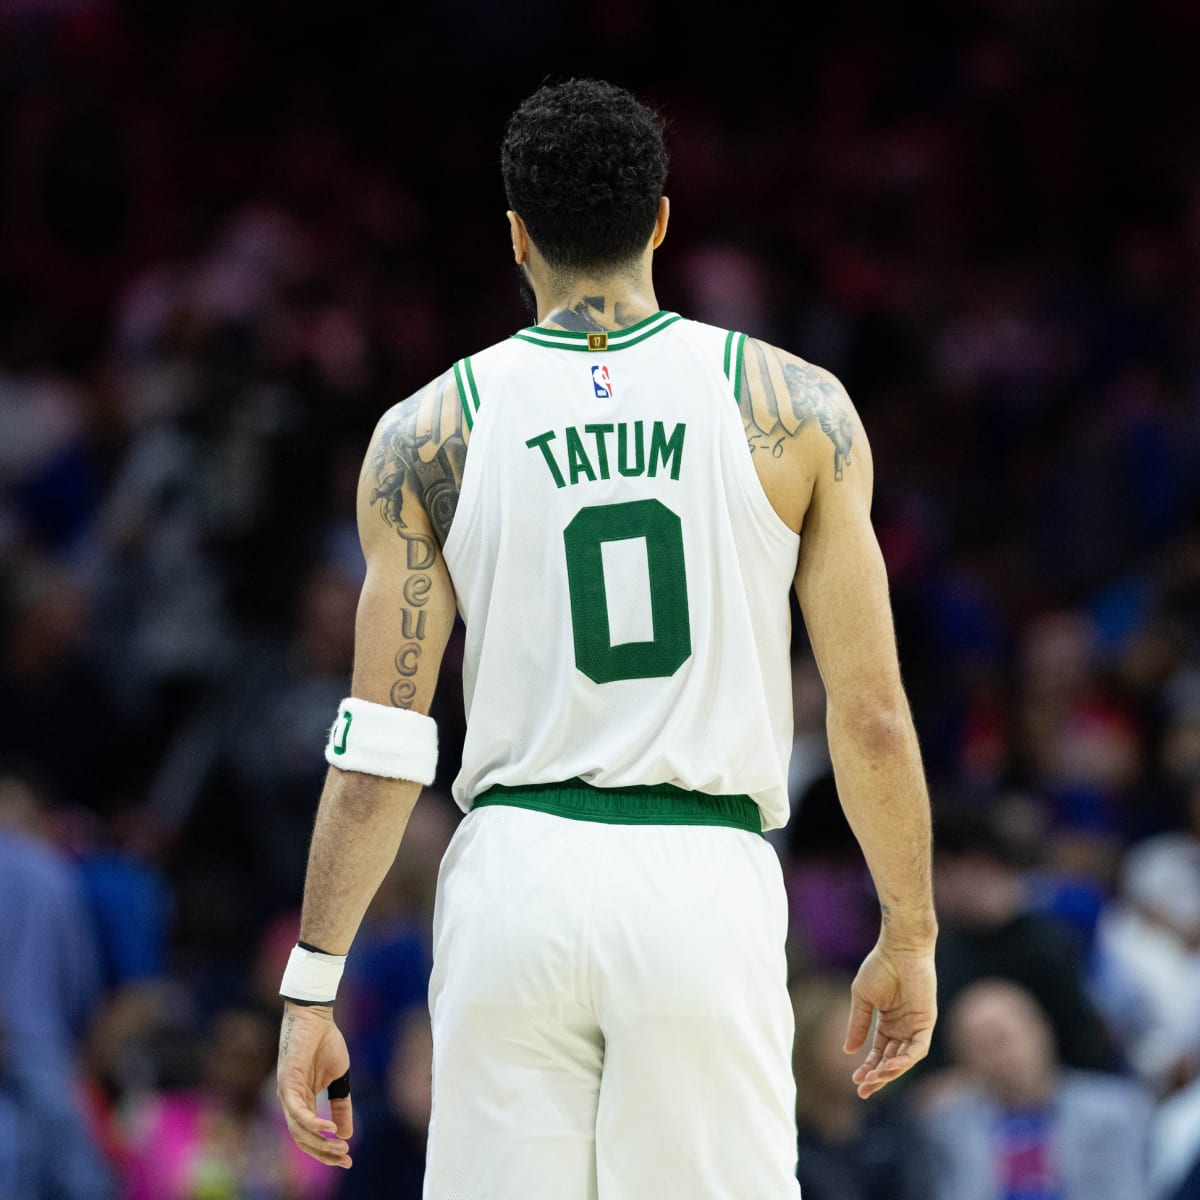 It's time for Jayson Tatum to focus on the prize that really